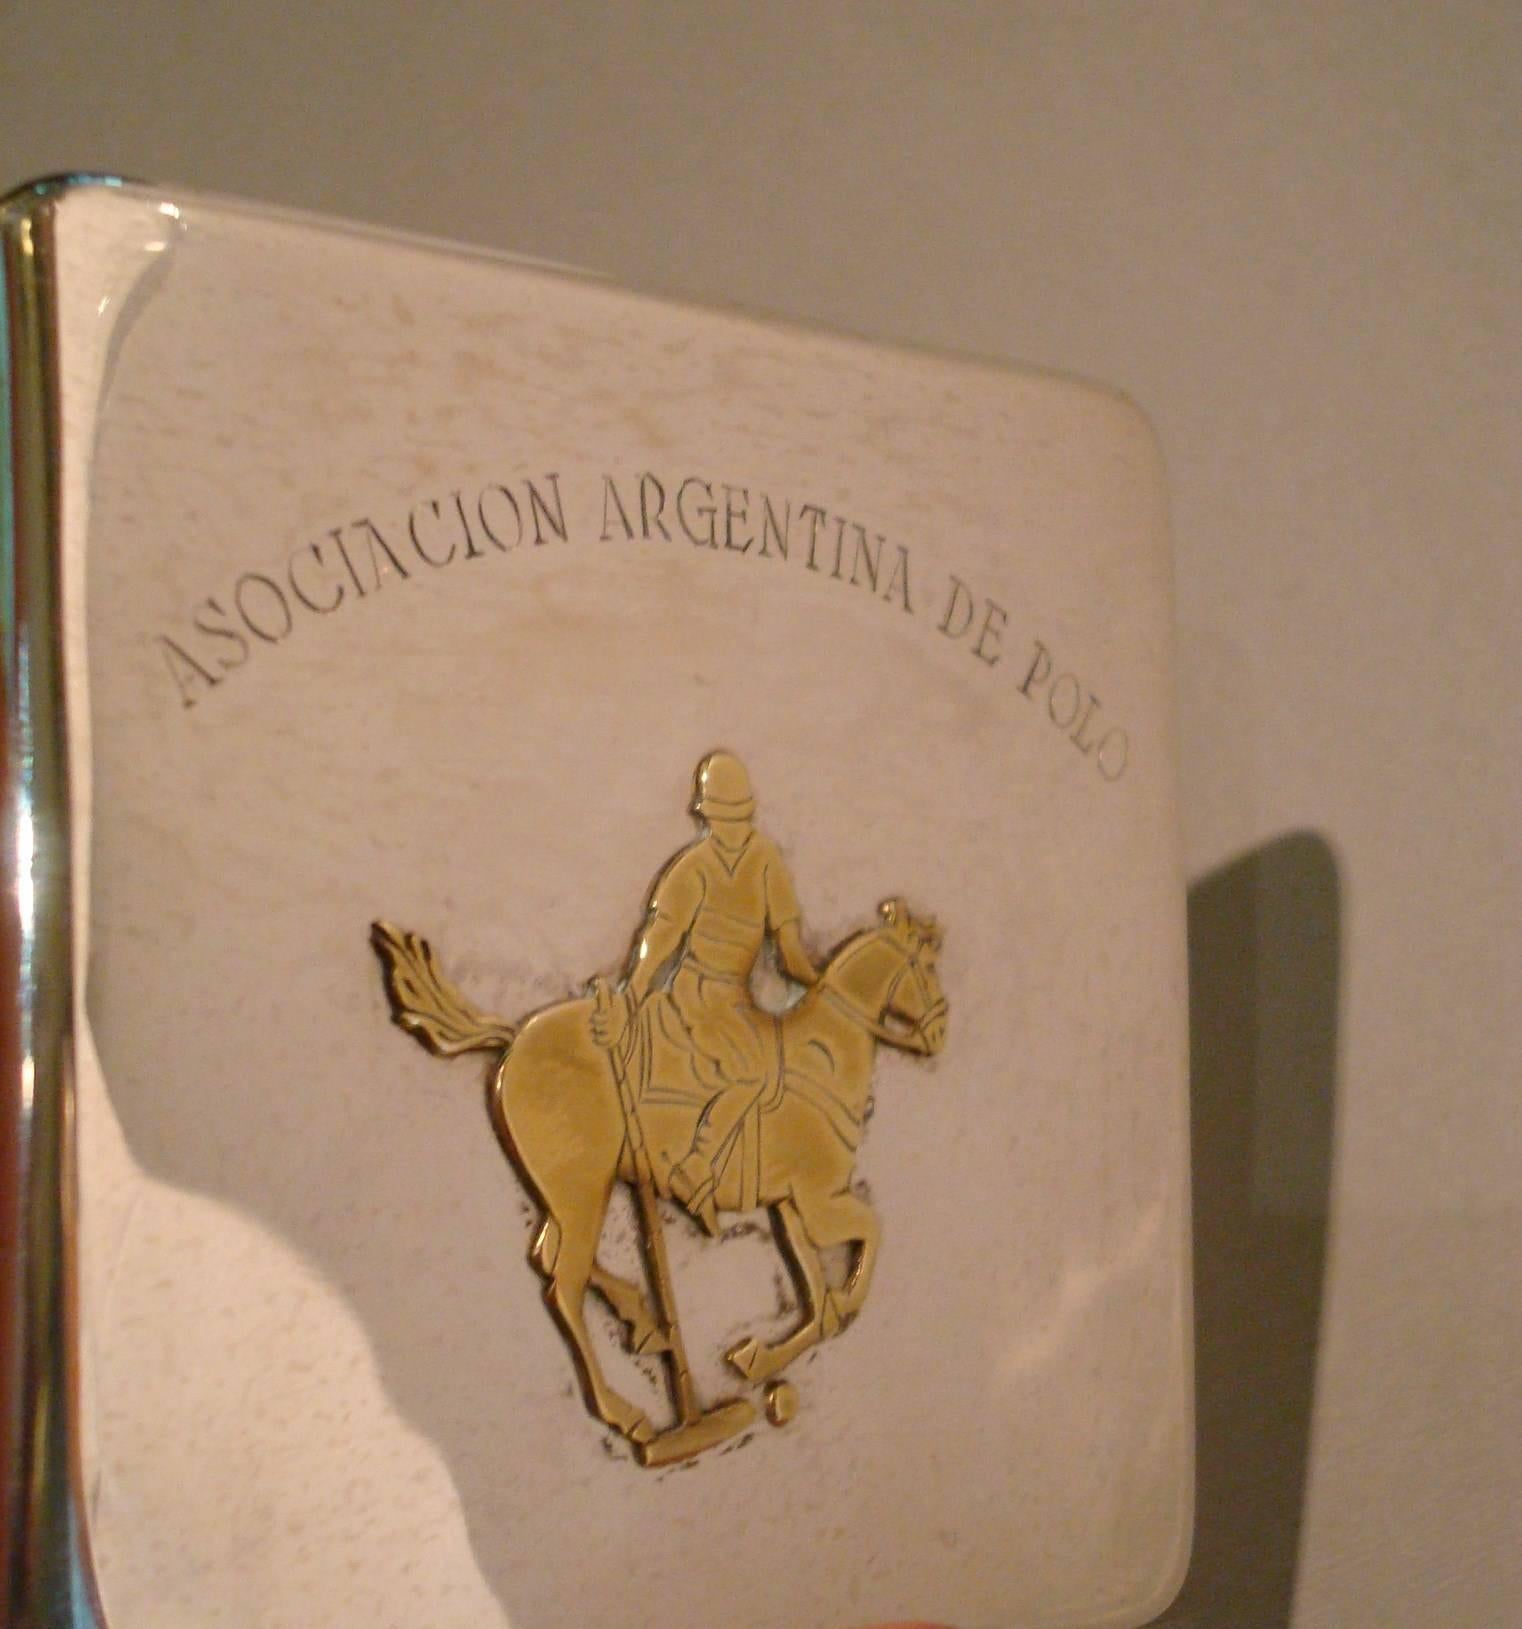 Lovely Polo scene silver cigarette case, can be used as card holder if the size is right.
English Silver. Marked Birmingham 1937-38 and marked Rowell Oxford.
Aybe it was a price given or a souvenir.